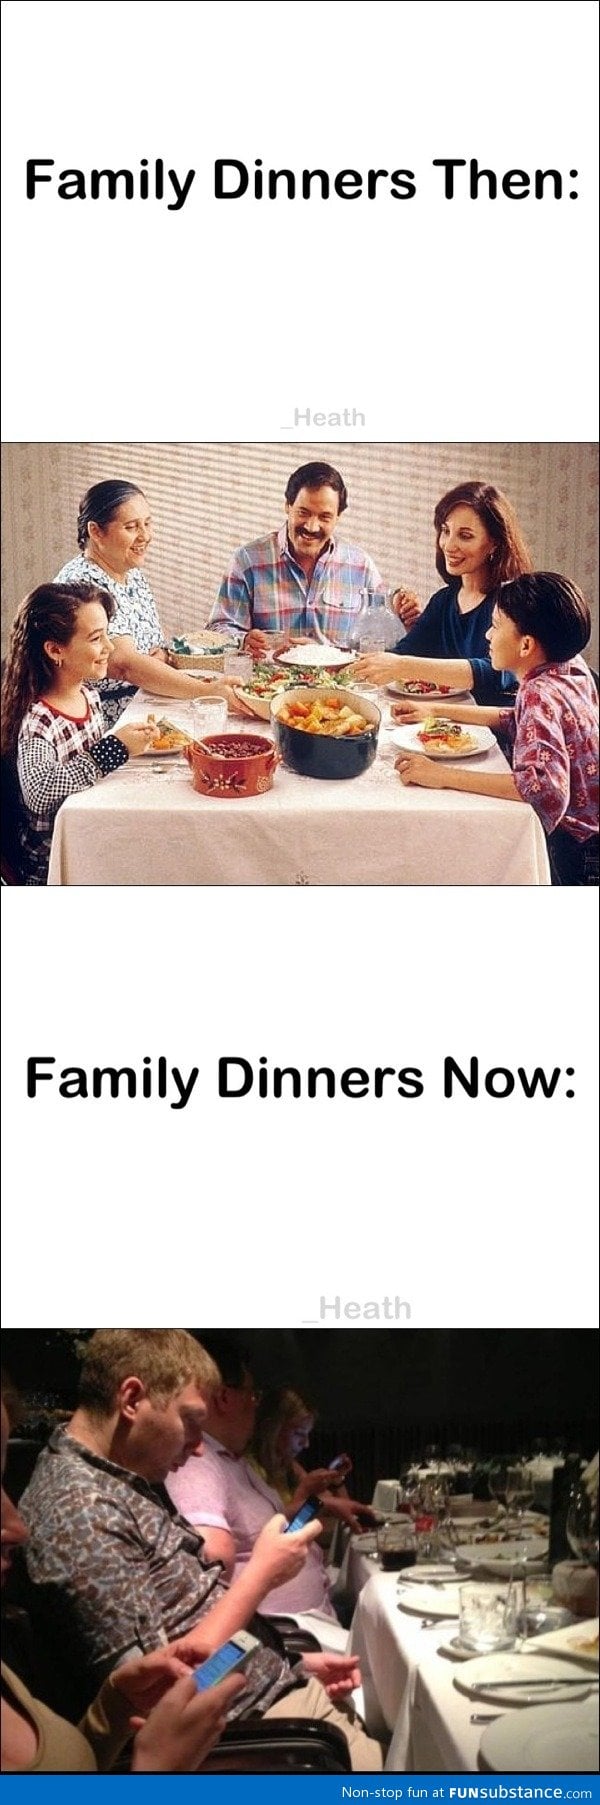 Family dinners then and now